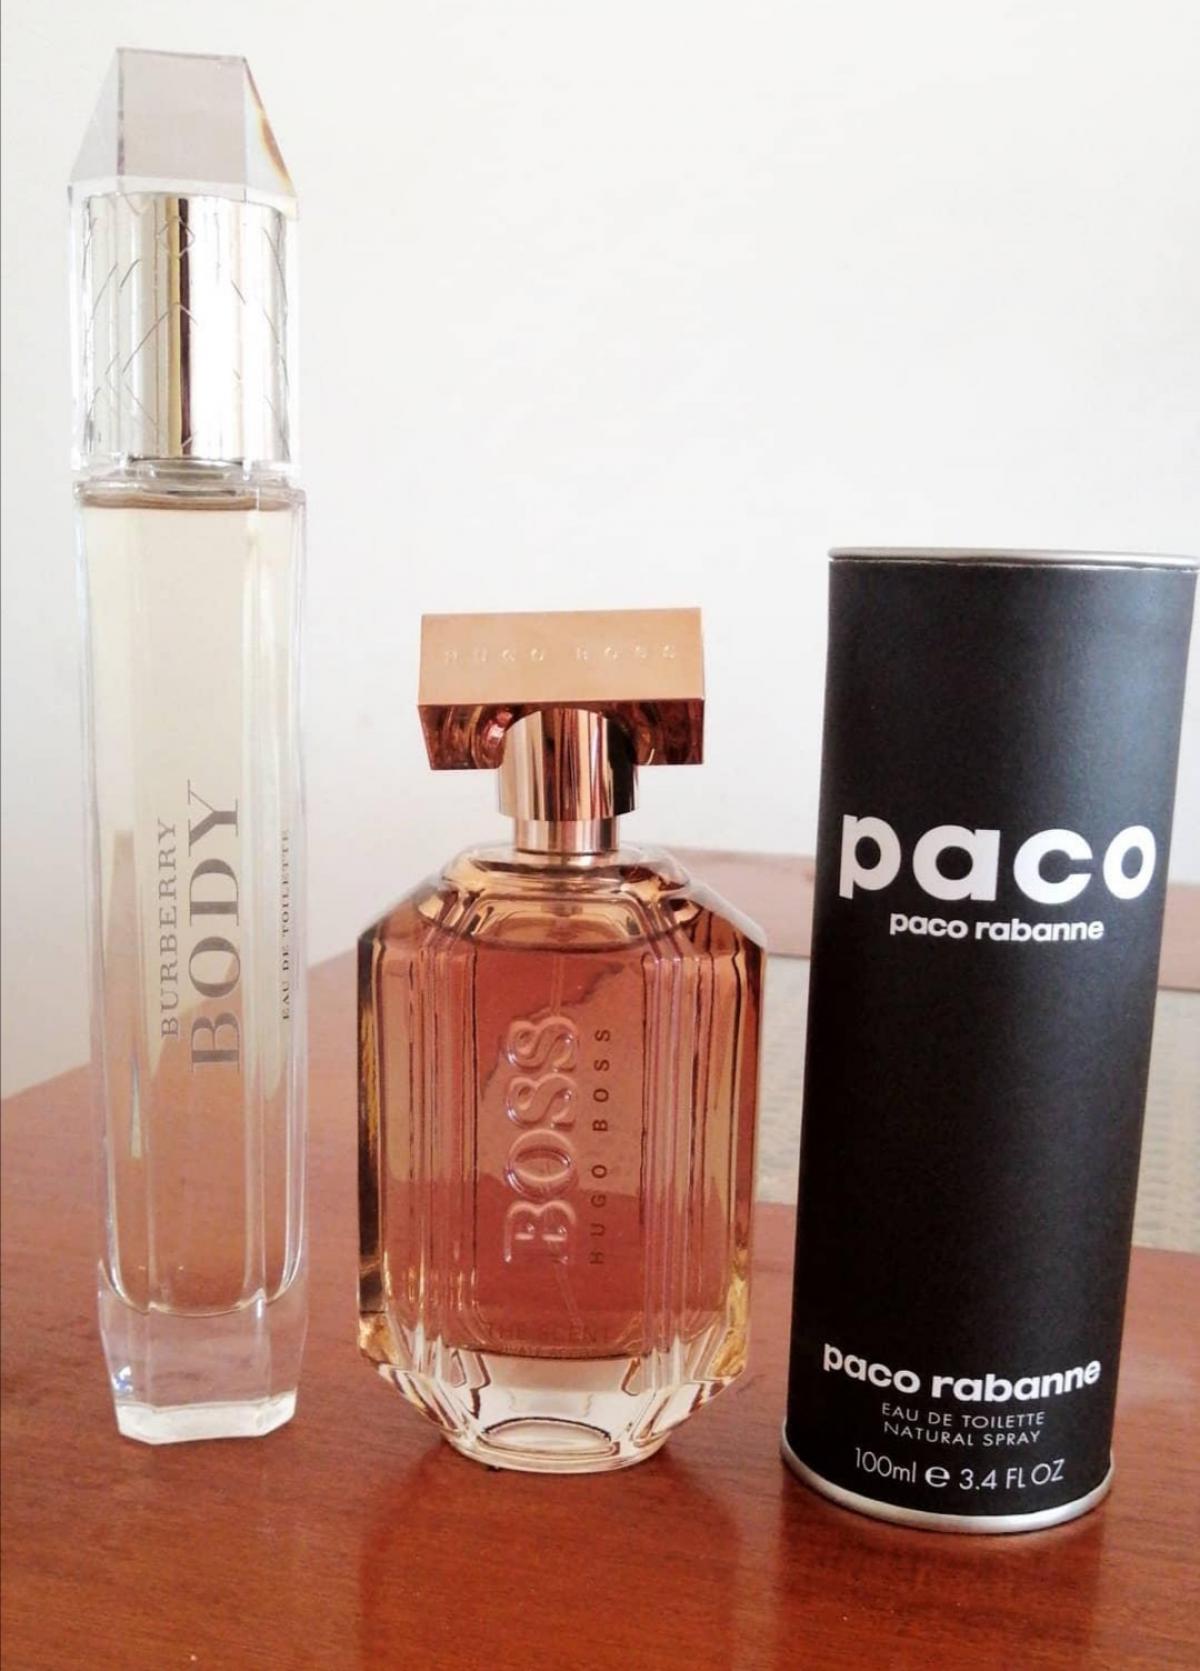 Paco Paco Rabanne perfume - a fragrance for women and men 1995